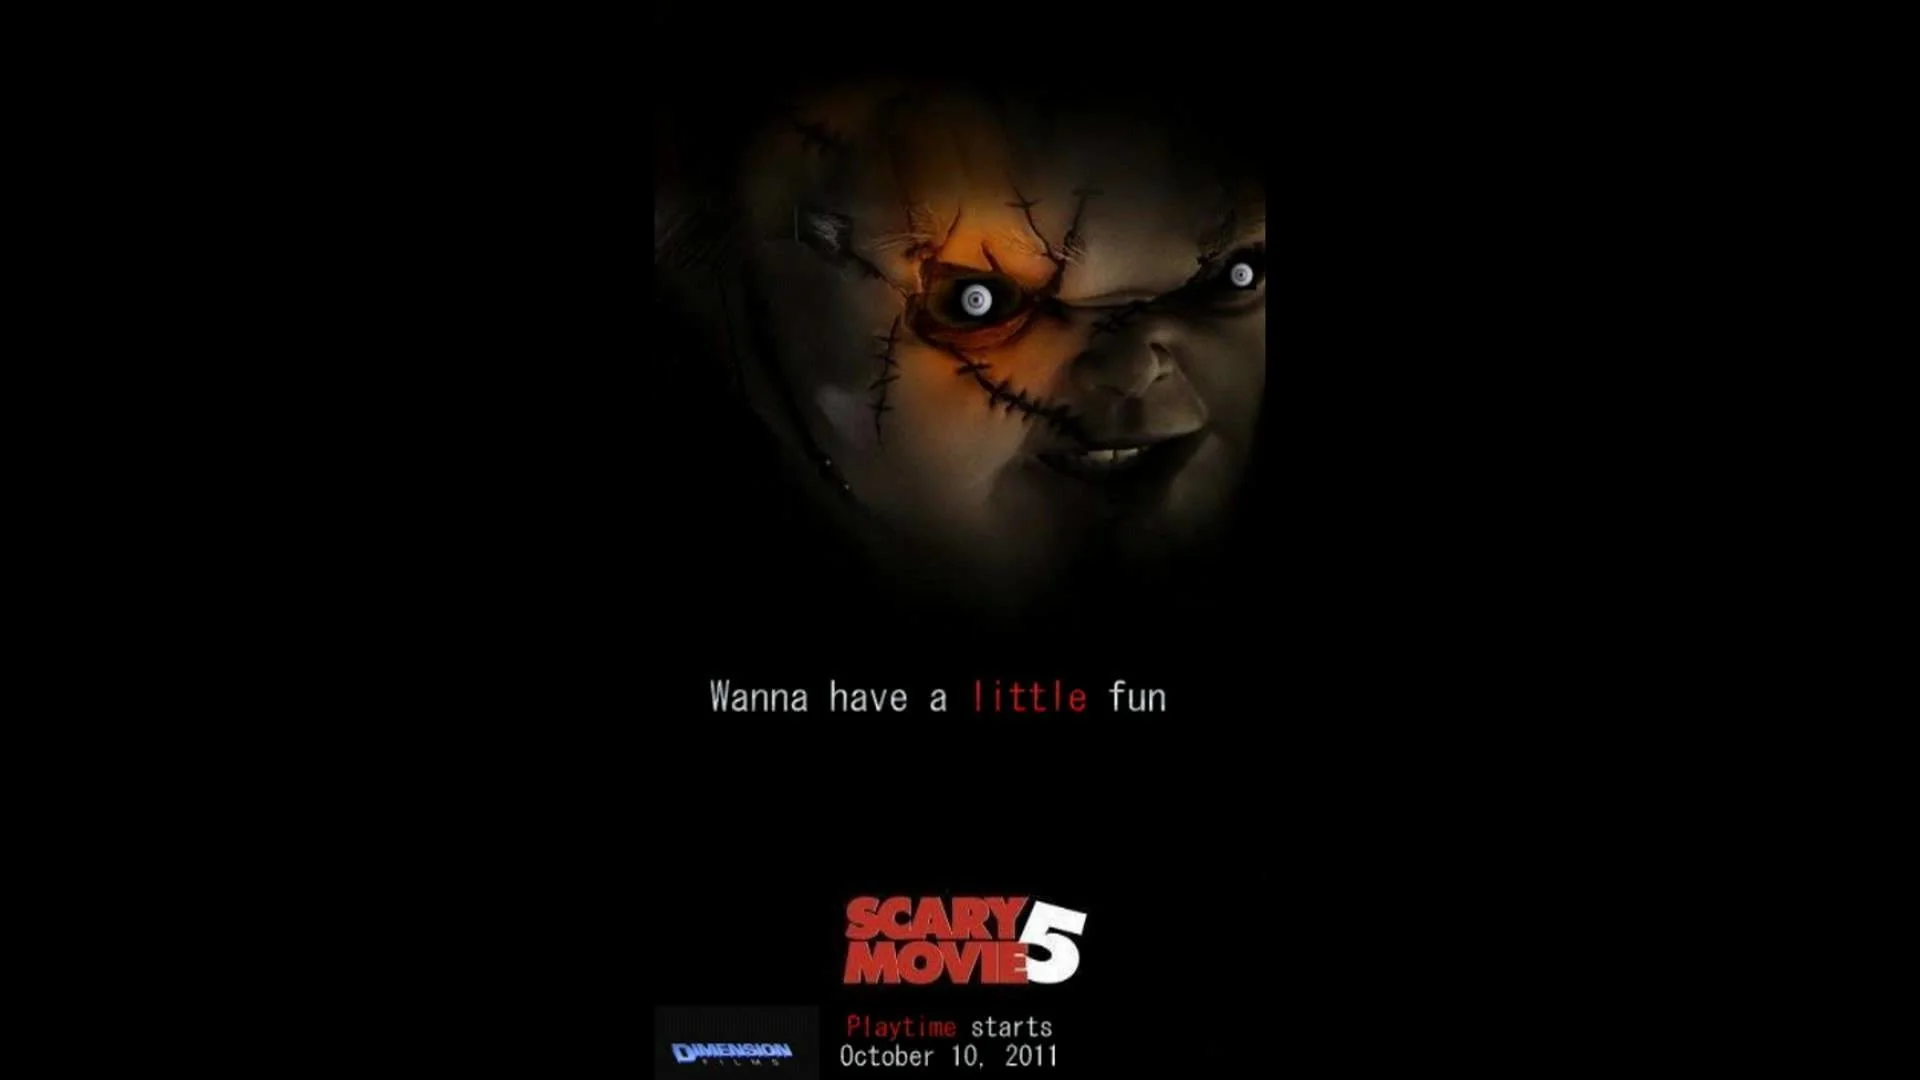 Scary Movie 5 – Seed Of Chucky FAKE spoof poster 05 / 15 / 09